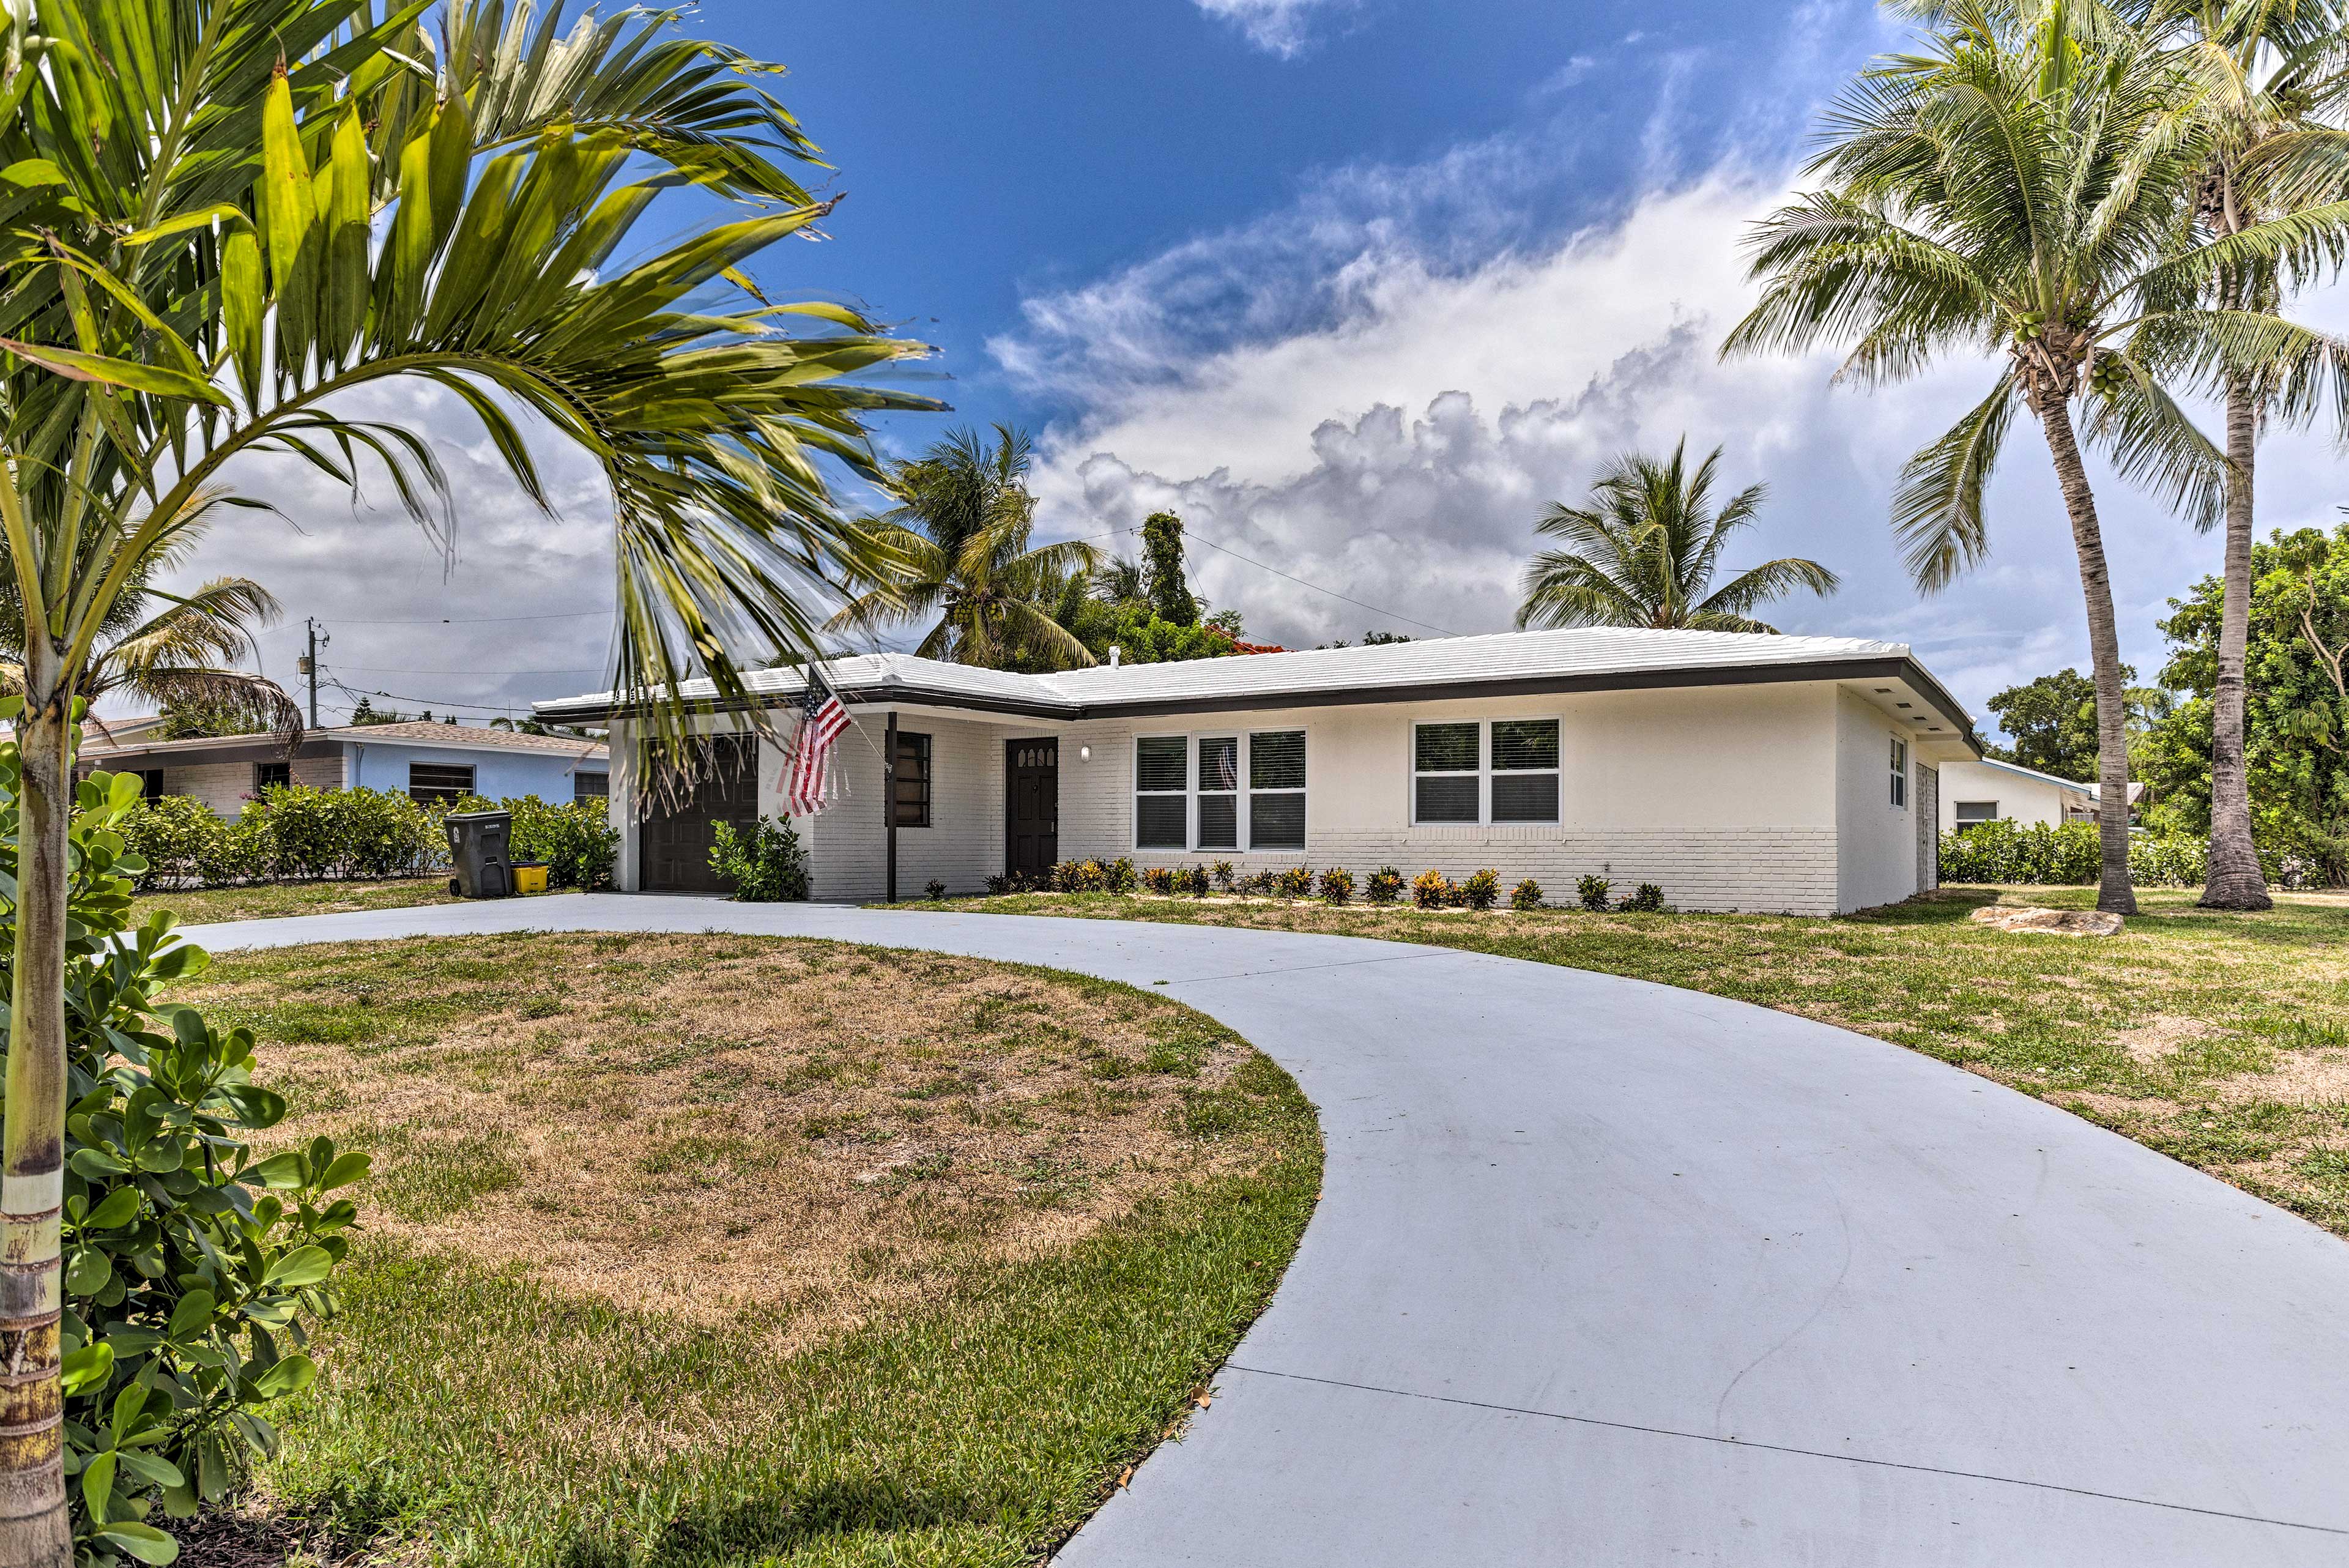 North Palm Beach Vacation Rental | 3BR | 2BA | 1,555 Sq Ft | Single-Story Home